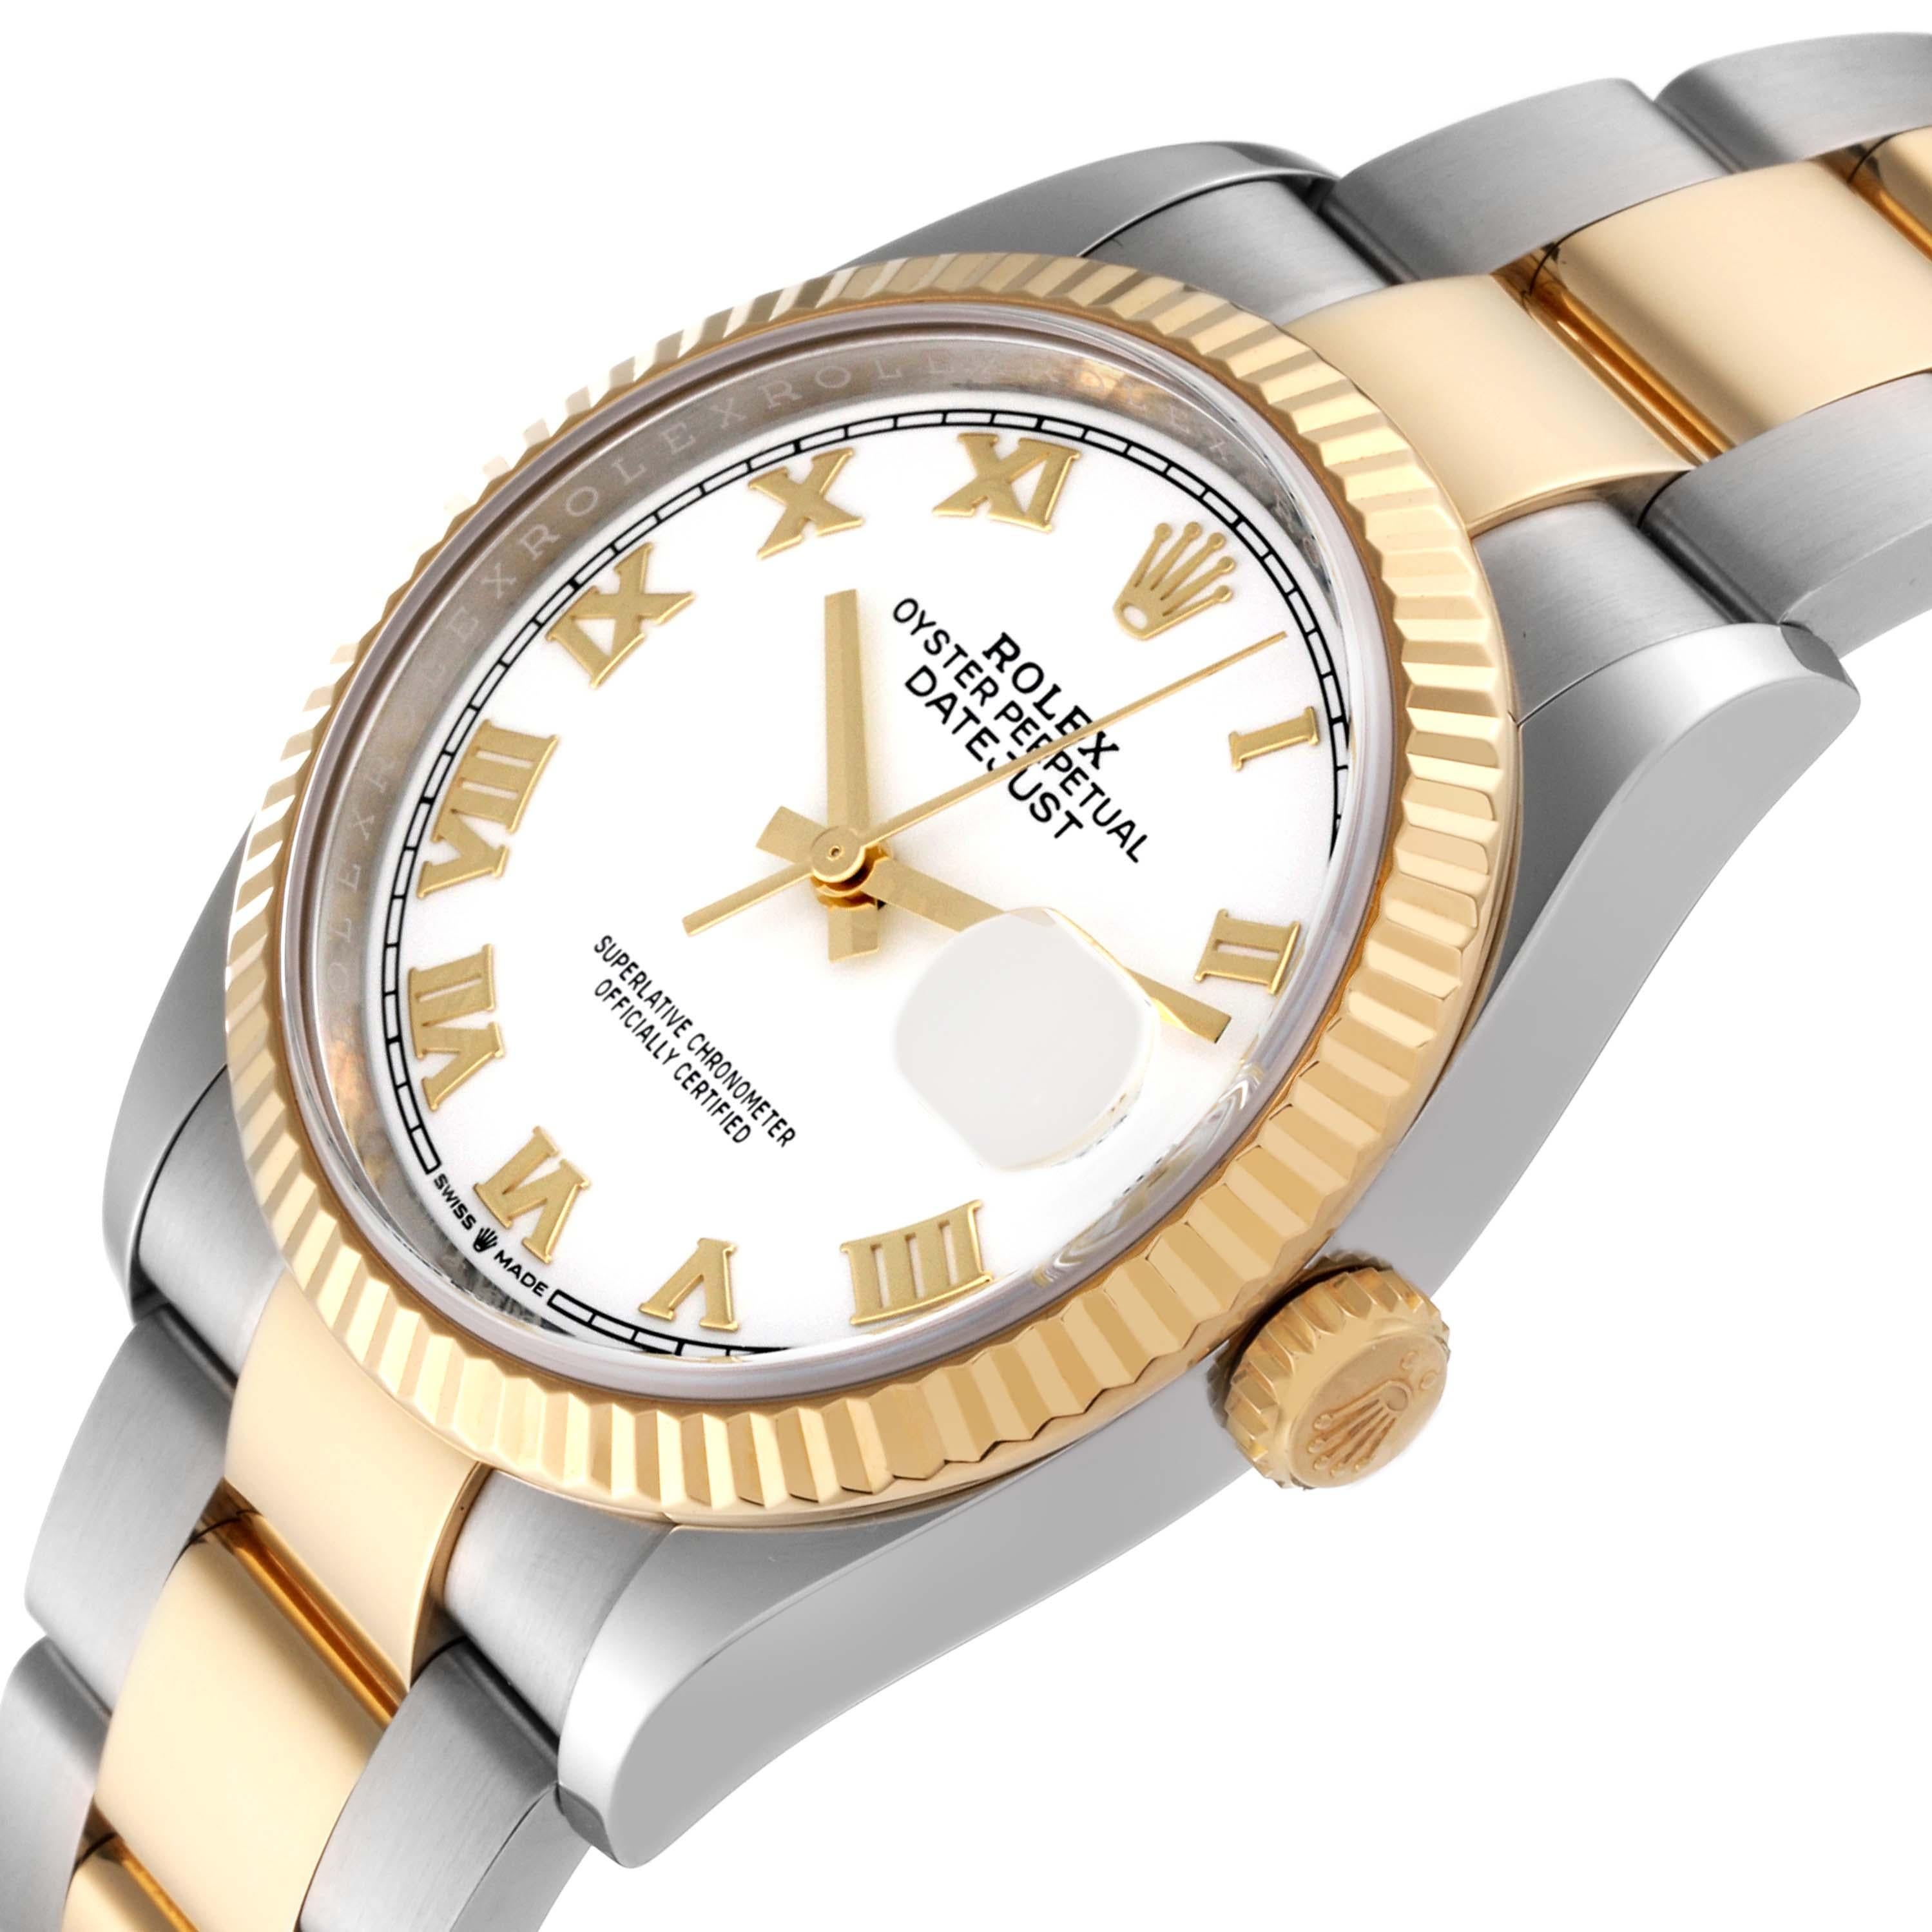 Rolex Datejust Steel Yellow Gold White Dial Mens Watch 126233 Box Card For Sale 4